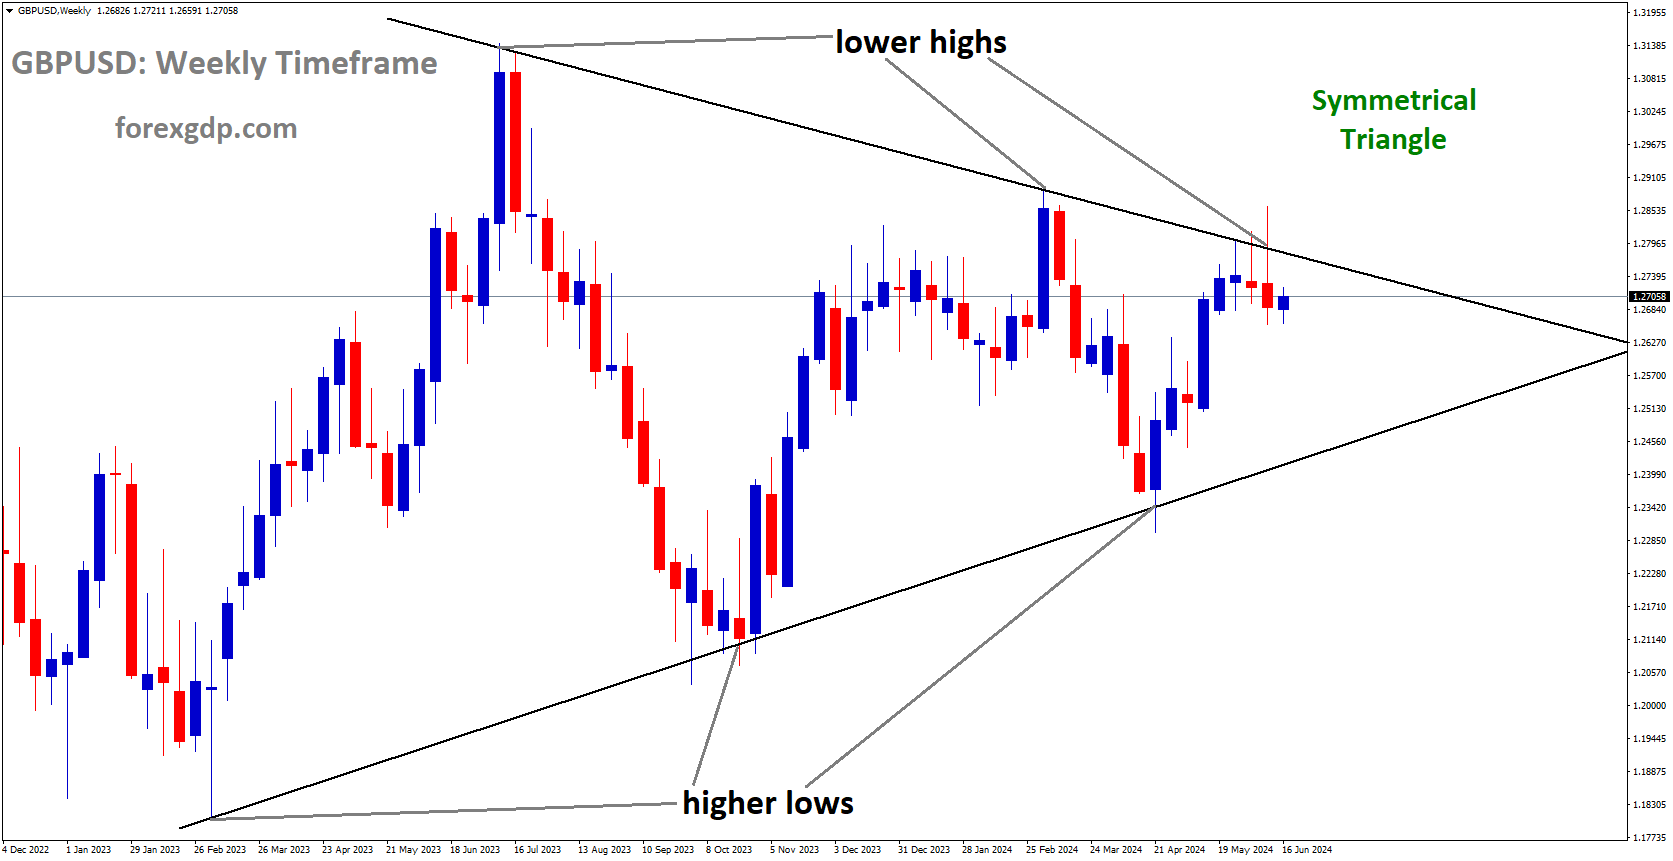 GBPUSD is moving in Symmetrical Triangle and market has reached lower high area of the pattern